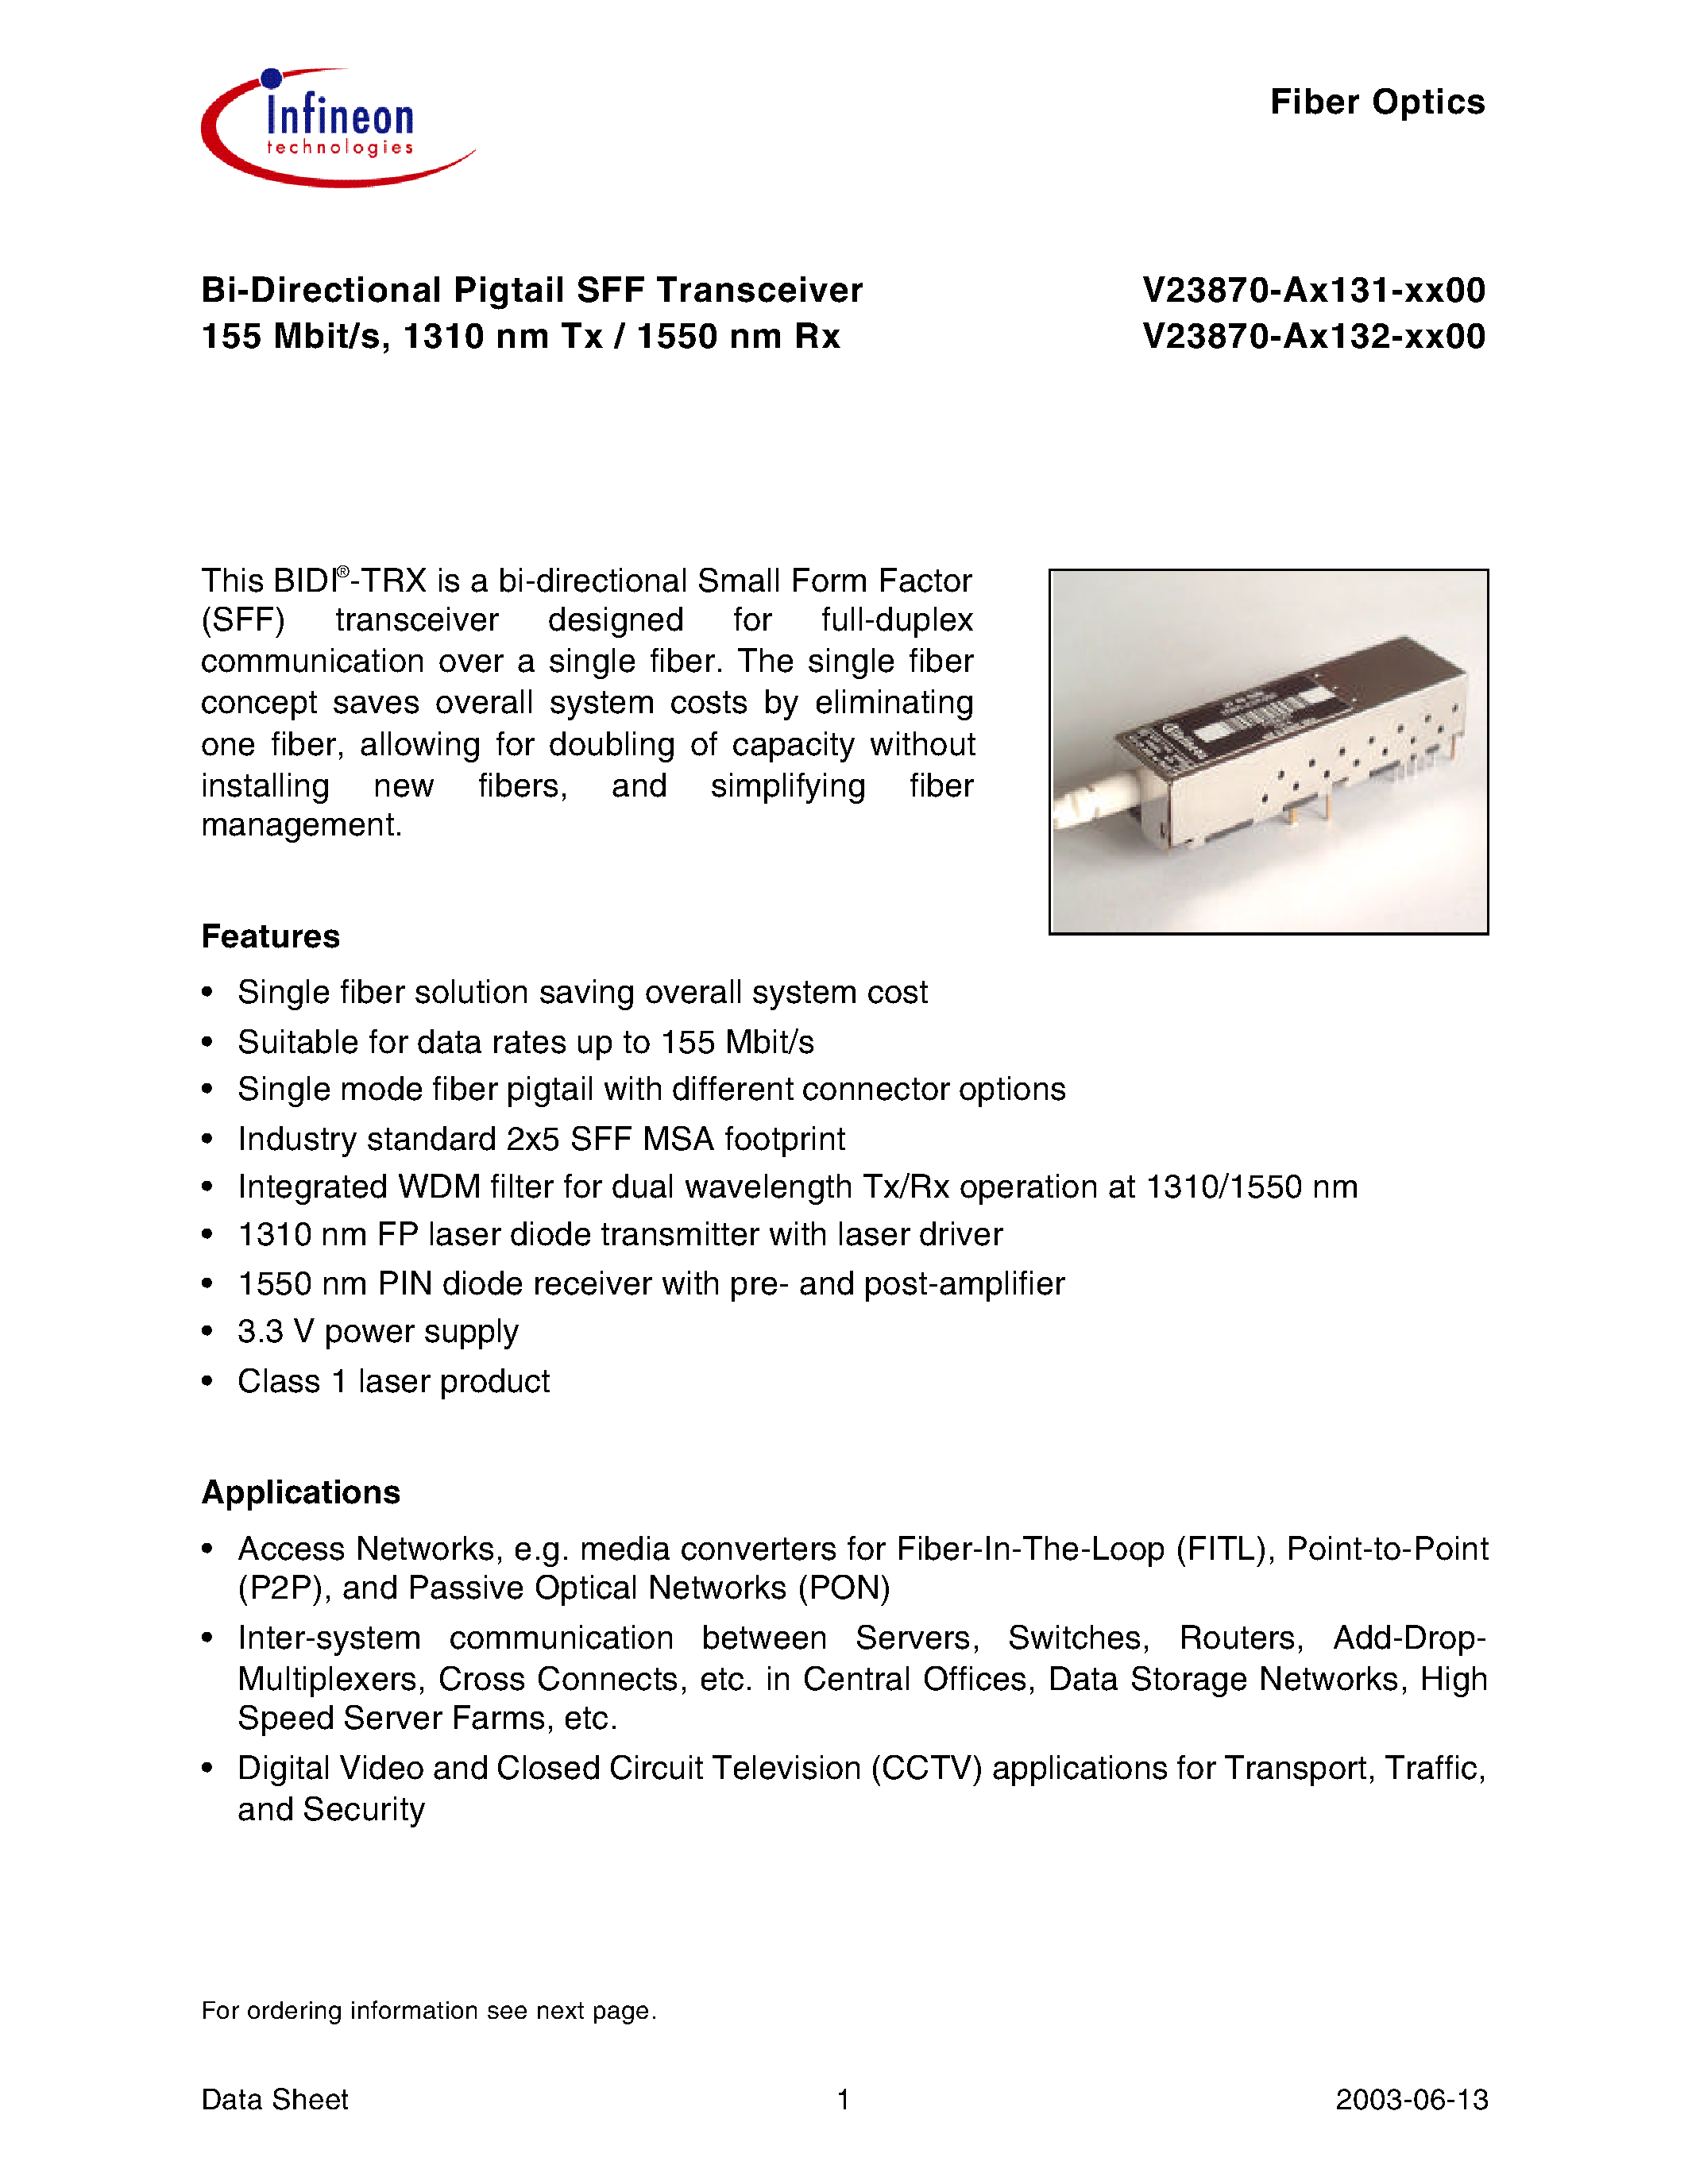 Datasheet V23870-A3131-H600 - Bi-Directional Pigtail SFF Transceiver 155 Mbit/s/ 1310 nm Tx / 1550 nm Rx page 1